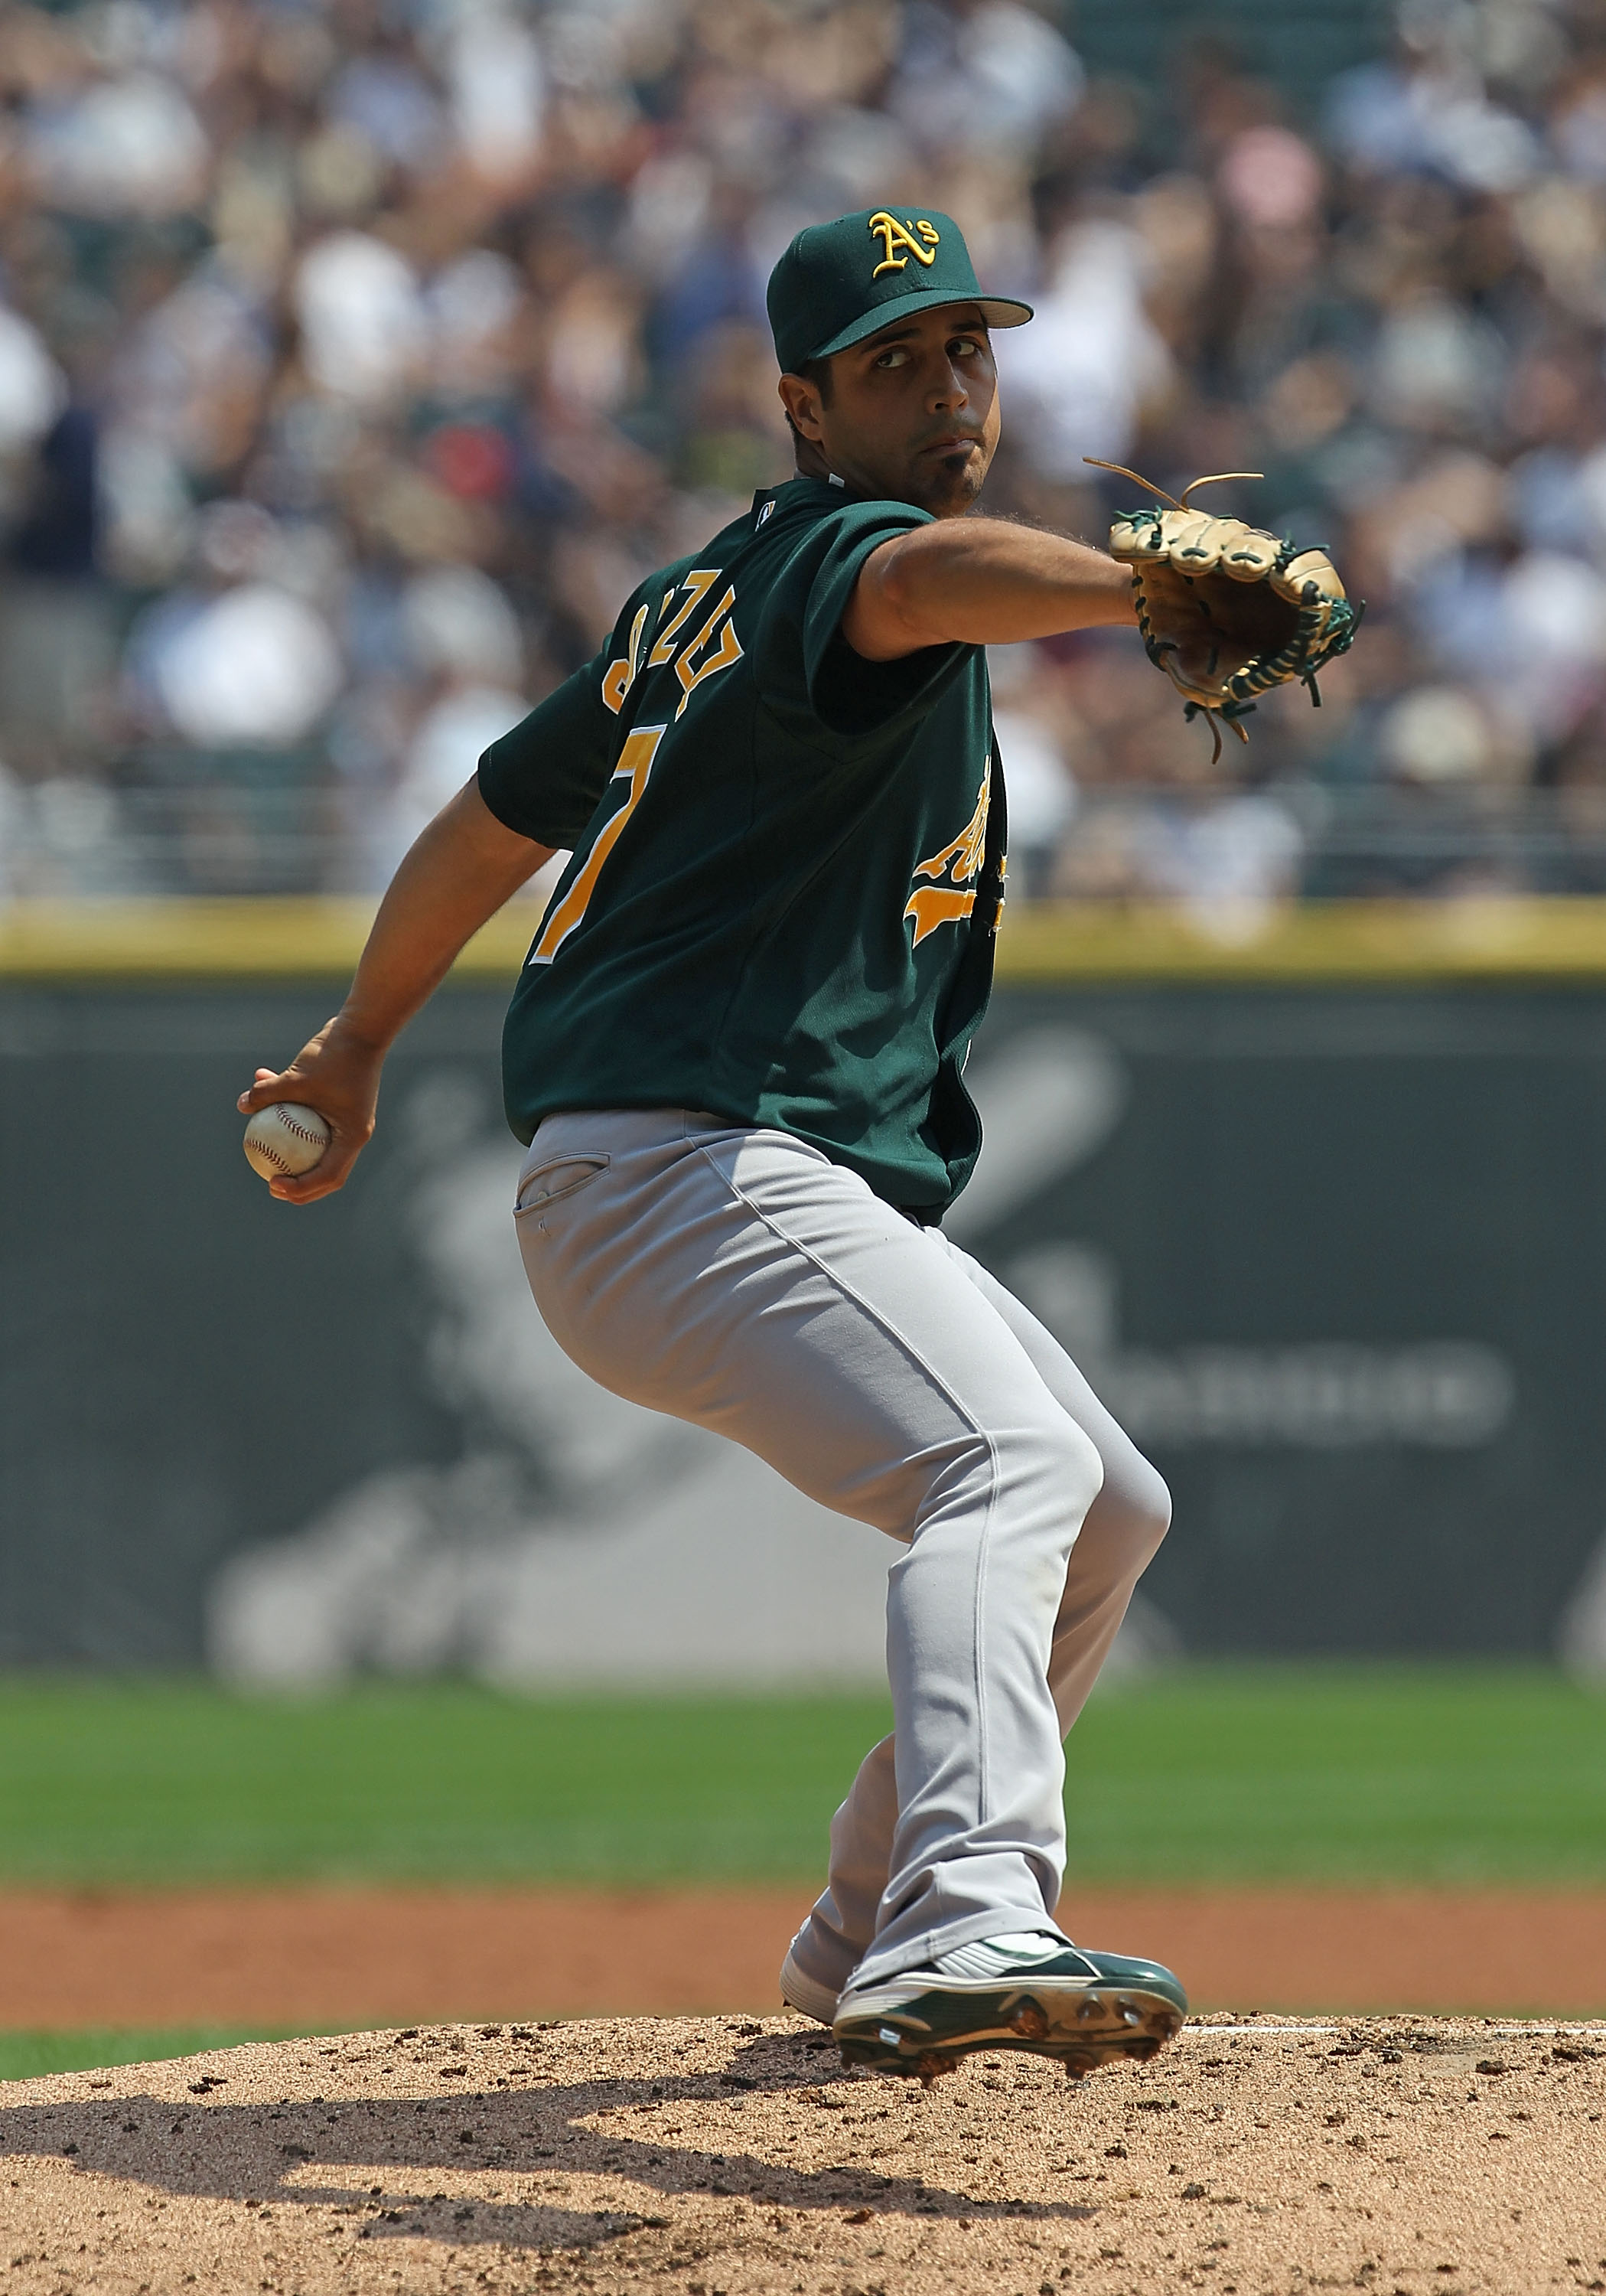 CHICAGO - AUGUST 01: Starting pitcher Gio Gonzalez #47 of the Oakland Athletics delivers the ball against the Chicago White Sox at U.S. Cellular Field on August 1, 2010 in Chicago, Illinois. The White Sox defeated the Athletics 4-1. (Photo by Jonathan Dan